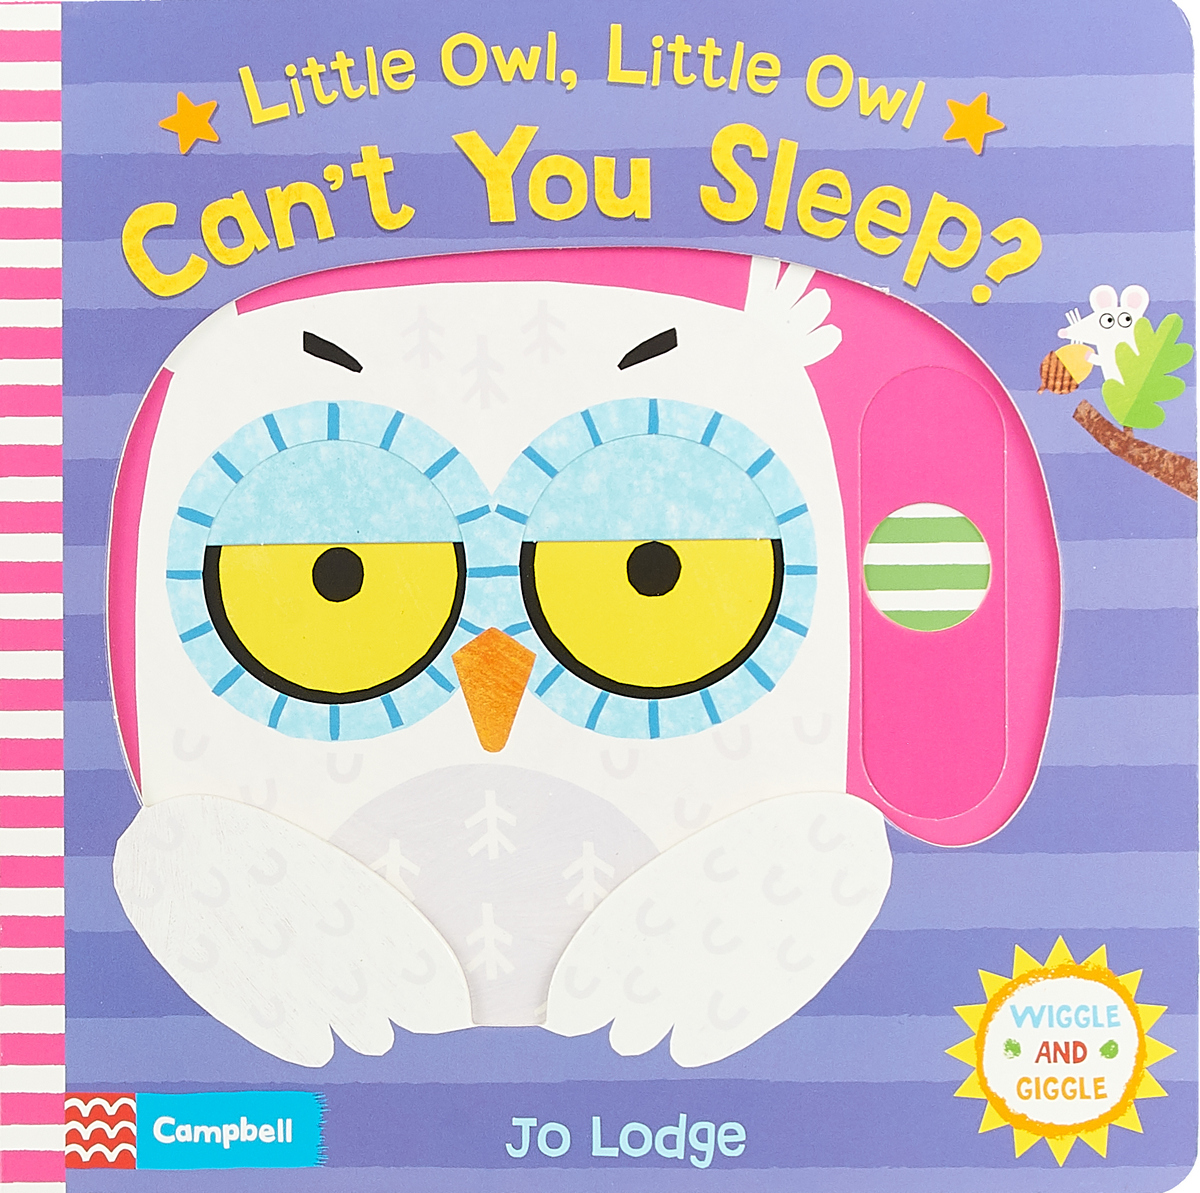 Little life book. The little Owl New York. Lil Owl. Little Owl Lost OZON.